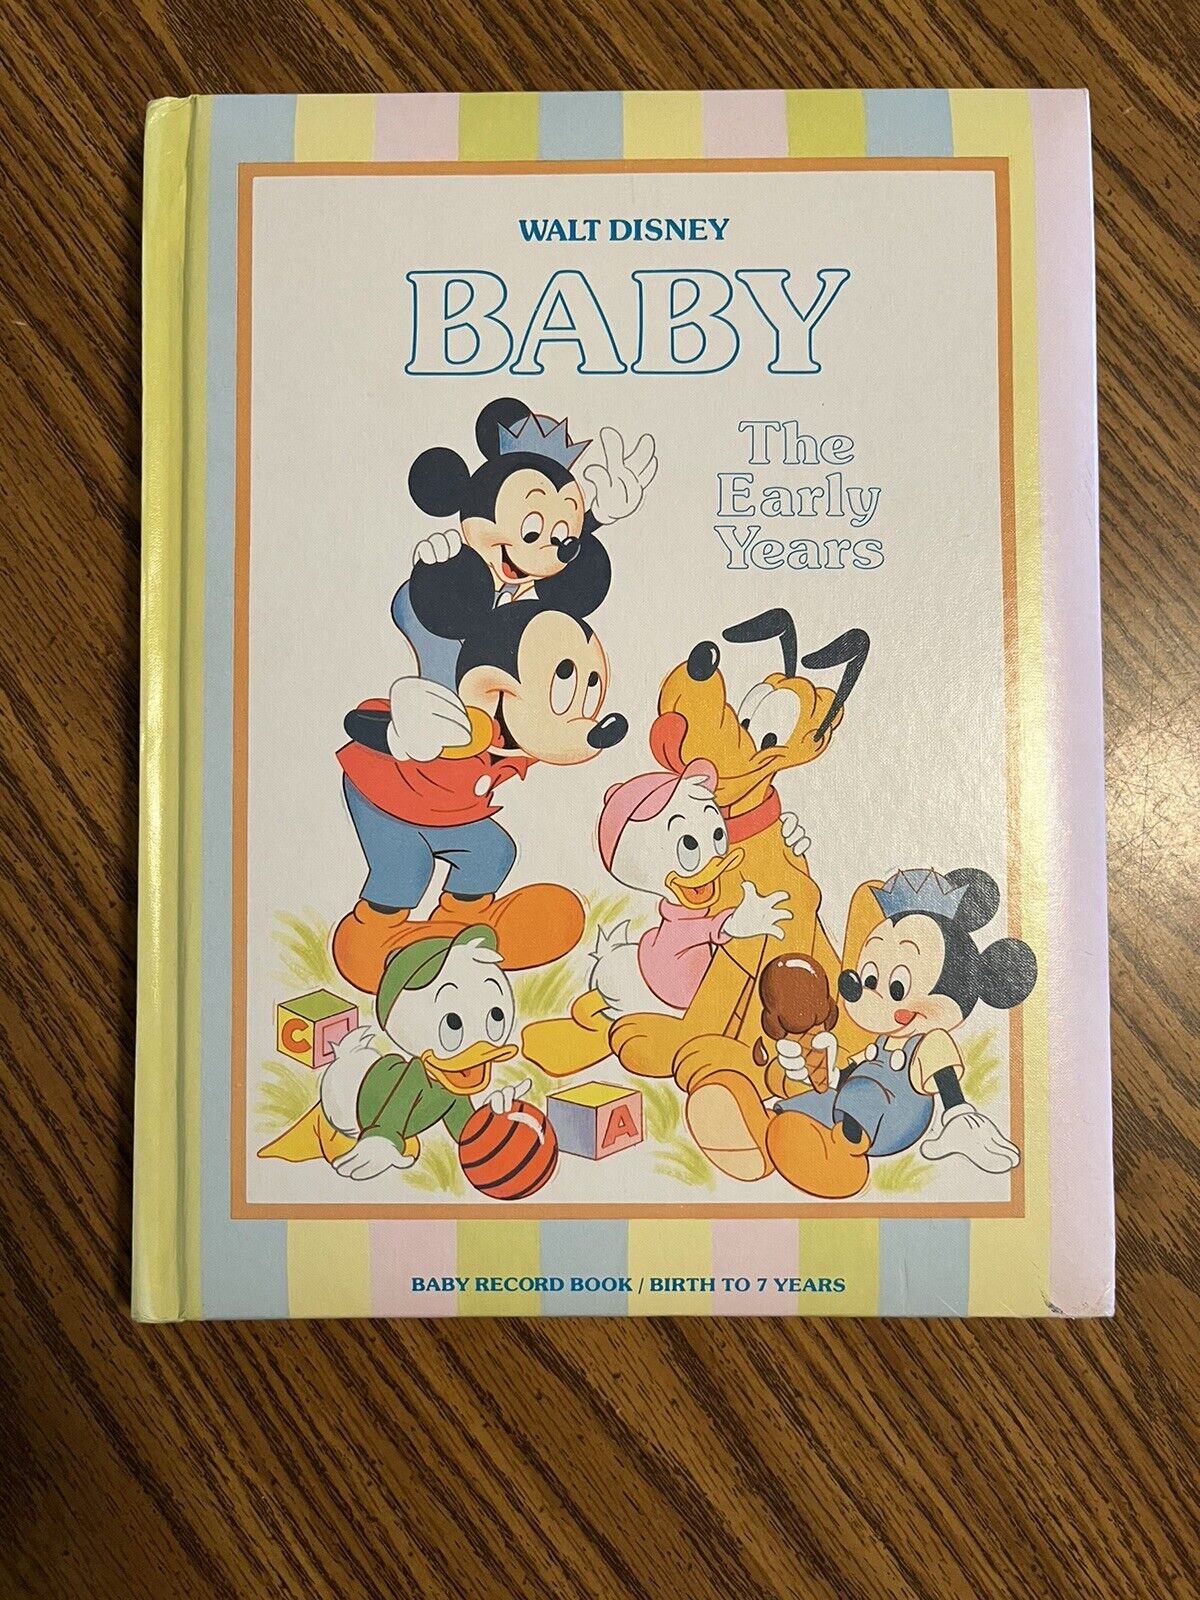 Vintage Rare 1983 Walt Disney Baby The Early Years Baby Record Book Birth to 7 